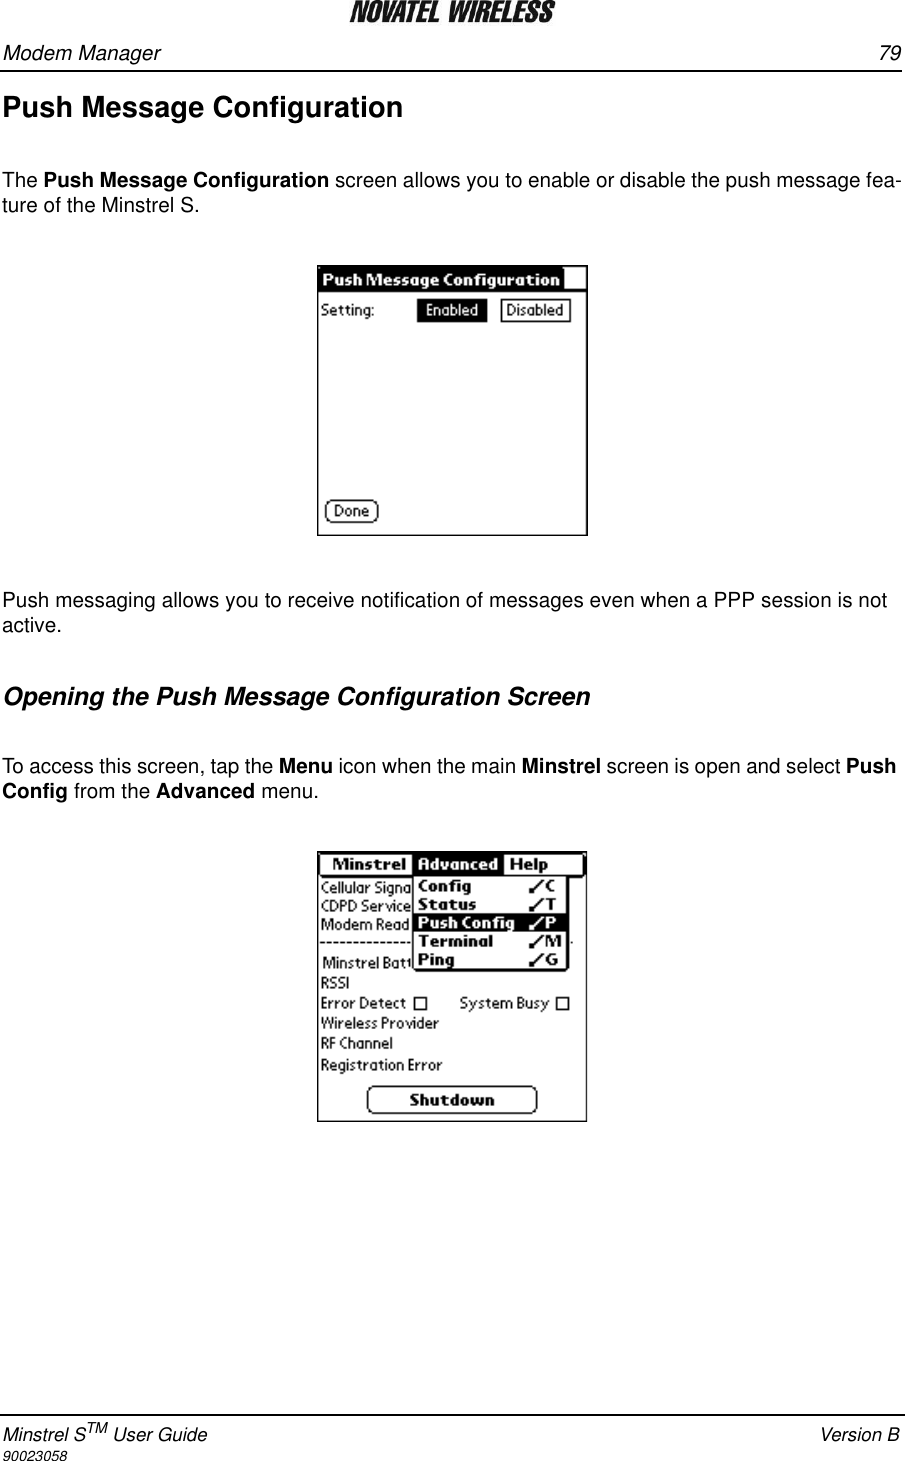 Modem Manager 79Minstrel STM User Guide Version B90023058Push Message ConfigurationThe Push Message Configuration screen allows you to enable or disable the push message fea-ture of the Minstrel S.Push messaging allows you to receive notification of messages even when a PPP session is not active.Opening the Push Message Configuration ScreenTo access this screen, tap the Menu icon when the main Minstrel screen is open and select Push Config from the Advanced menu.